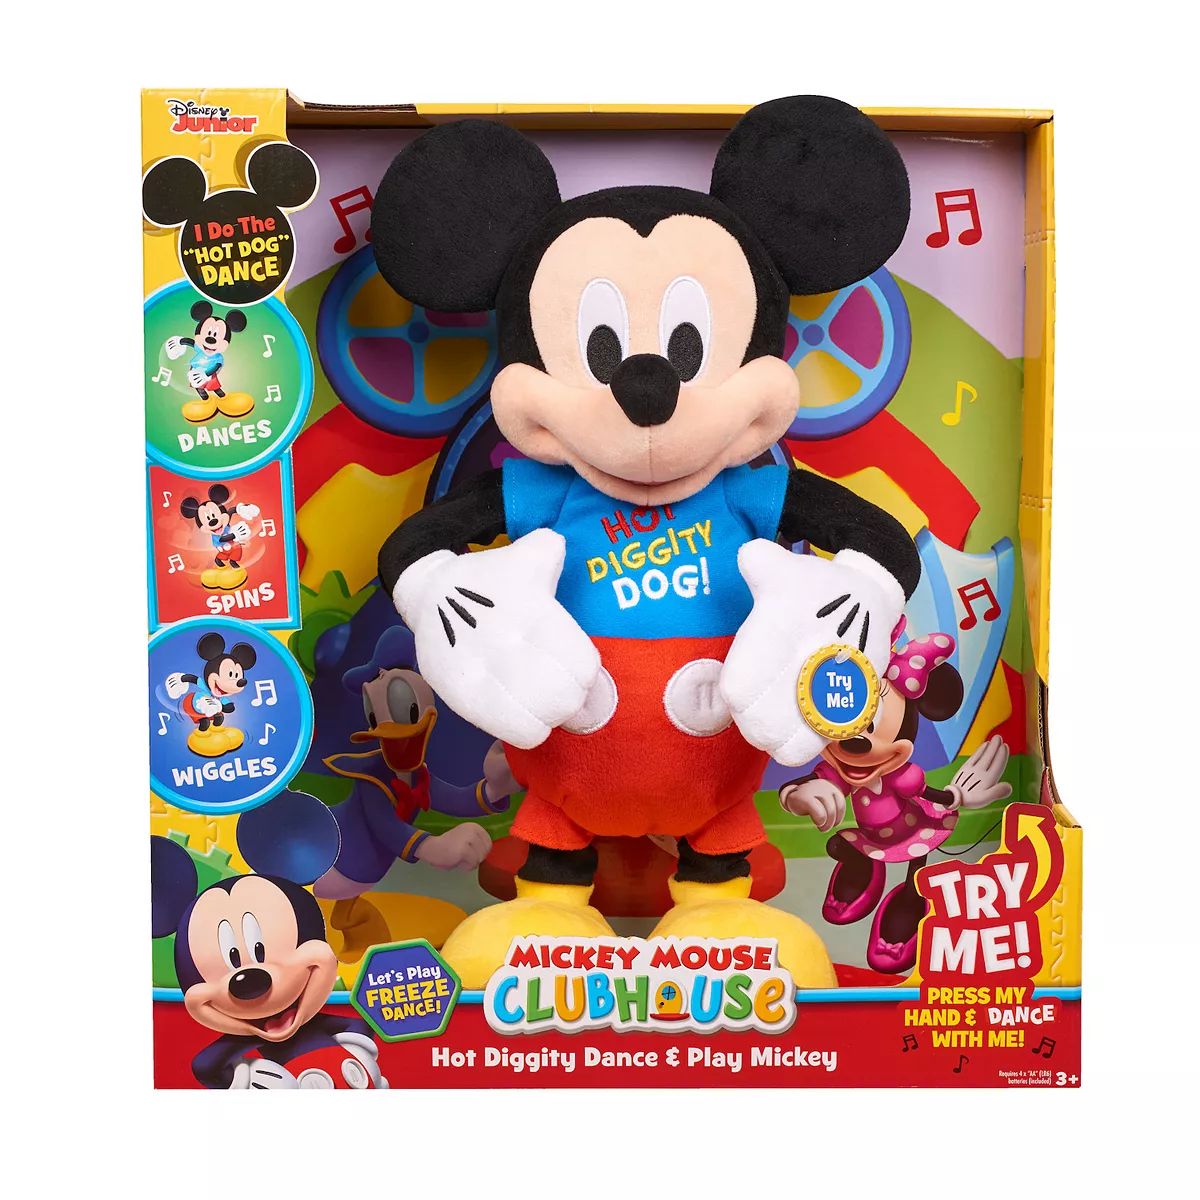 Disney Junior Mickey Mouse Clubhouse Hot Diggity Dance & Play Mickey Interactive Plush Toy | Kohl's